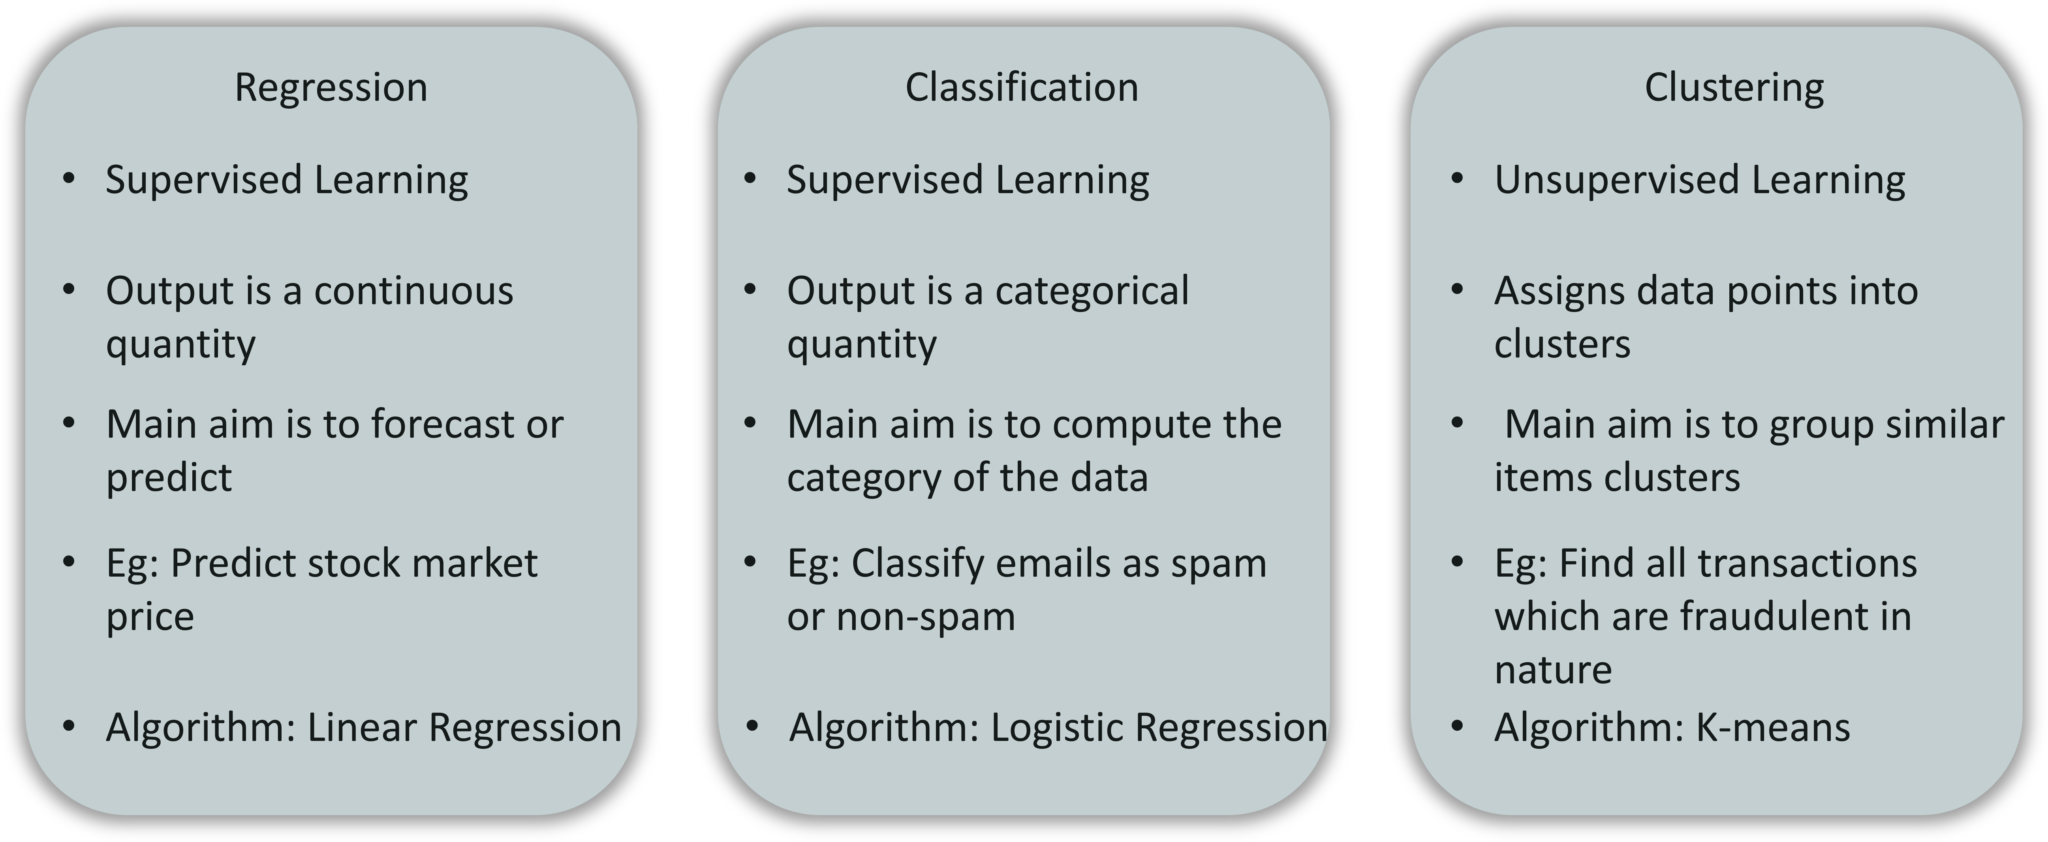 Regression-vs-Classification-vs-Clustering-Introduction-To-Machine-Learning-Edureka.png